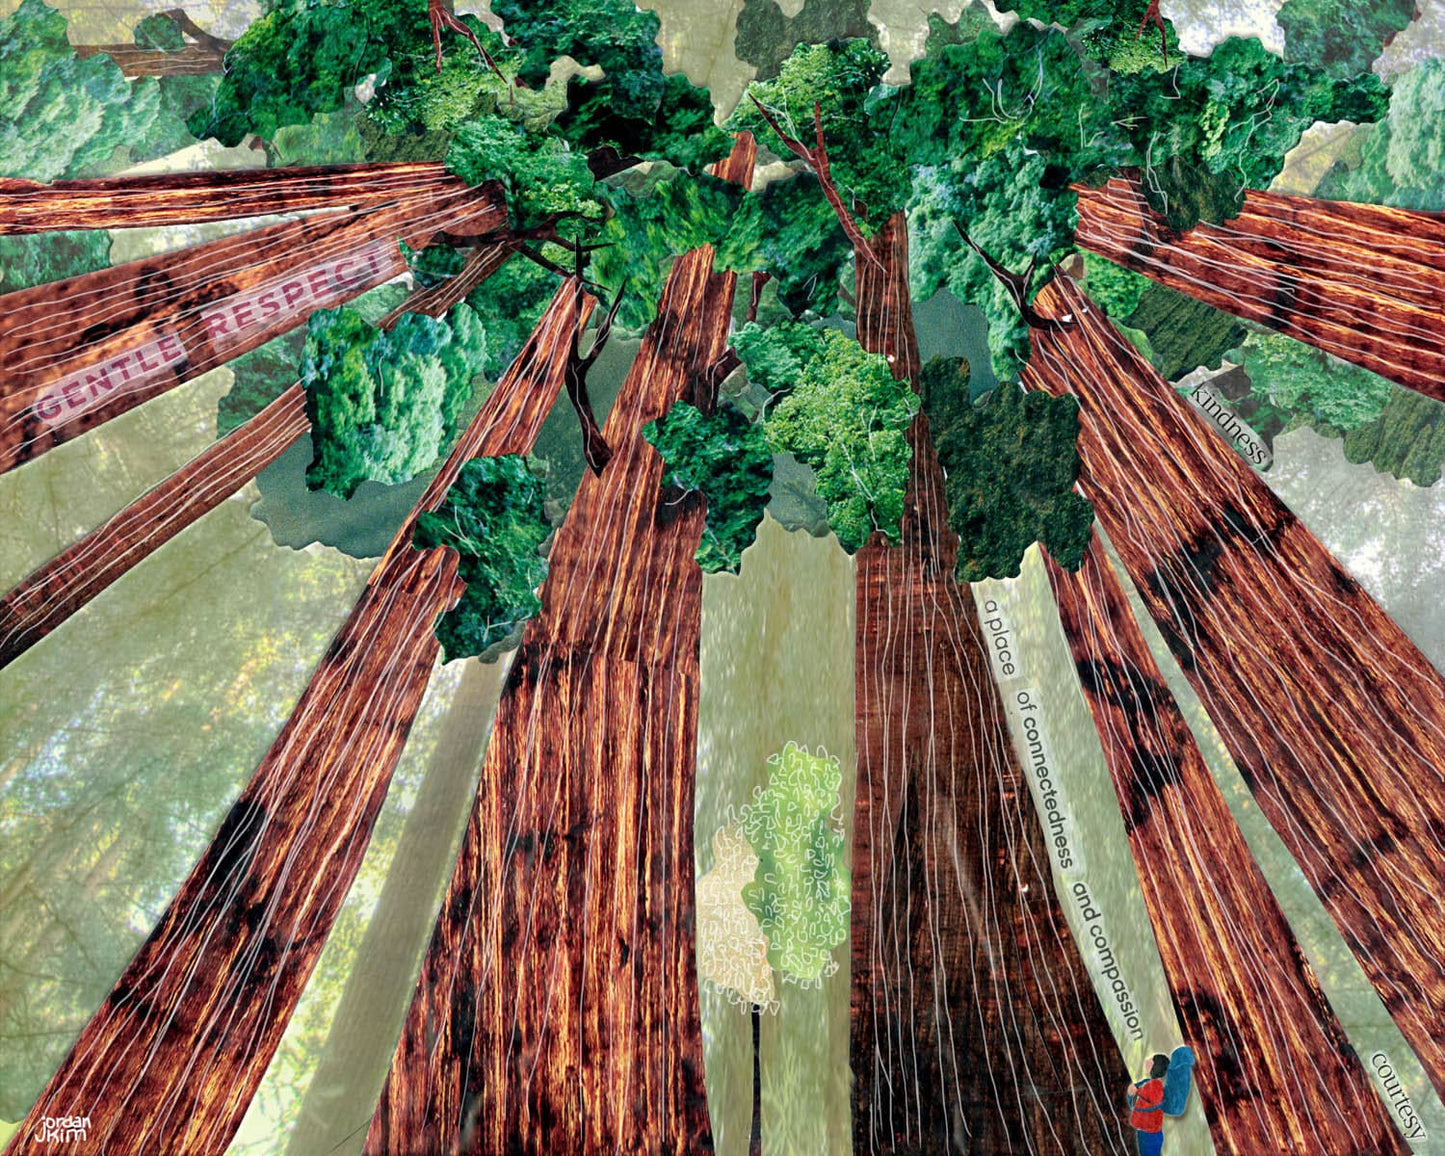 Greeting Card of a Backpacker Looking Up into the Canopy of the Redwoods - Anytime -Nature Lover - Forest - Blank Card